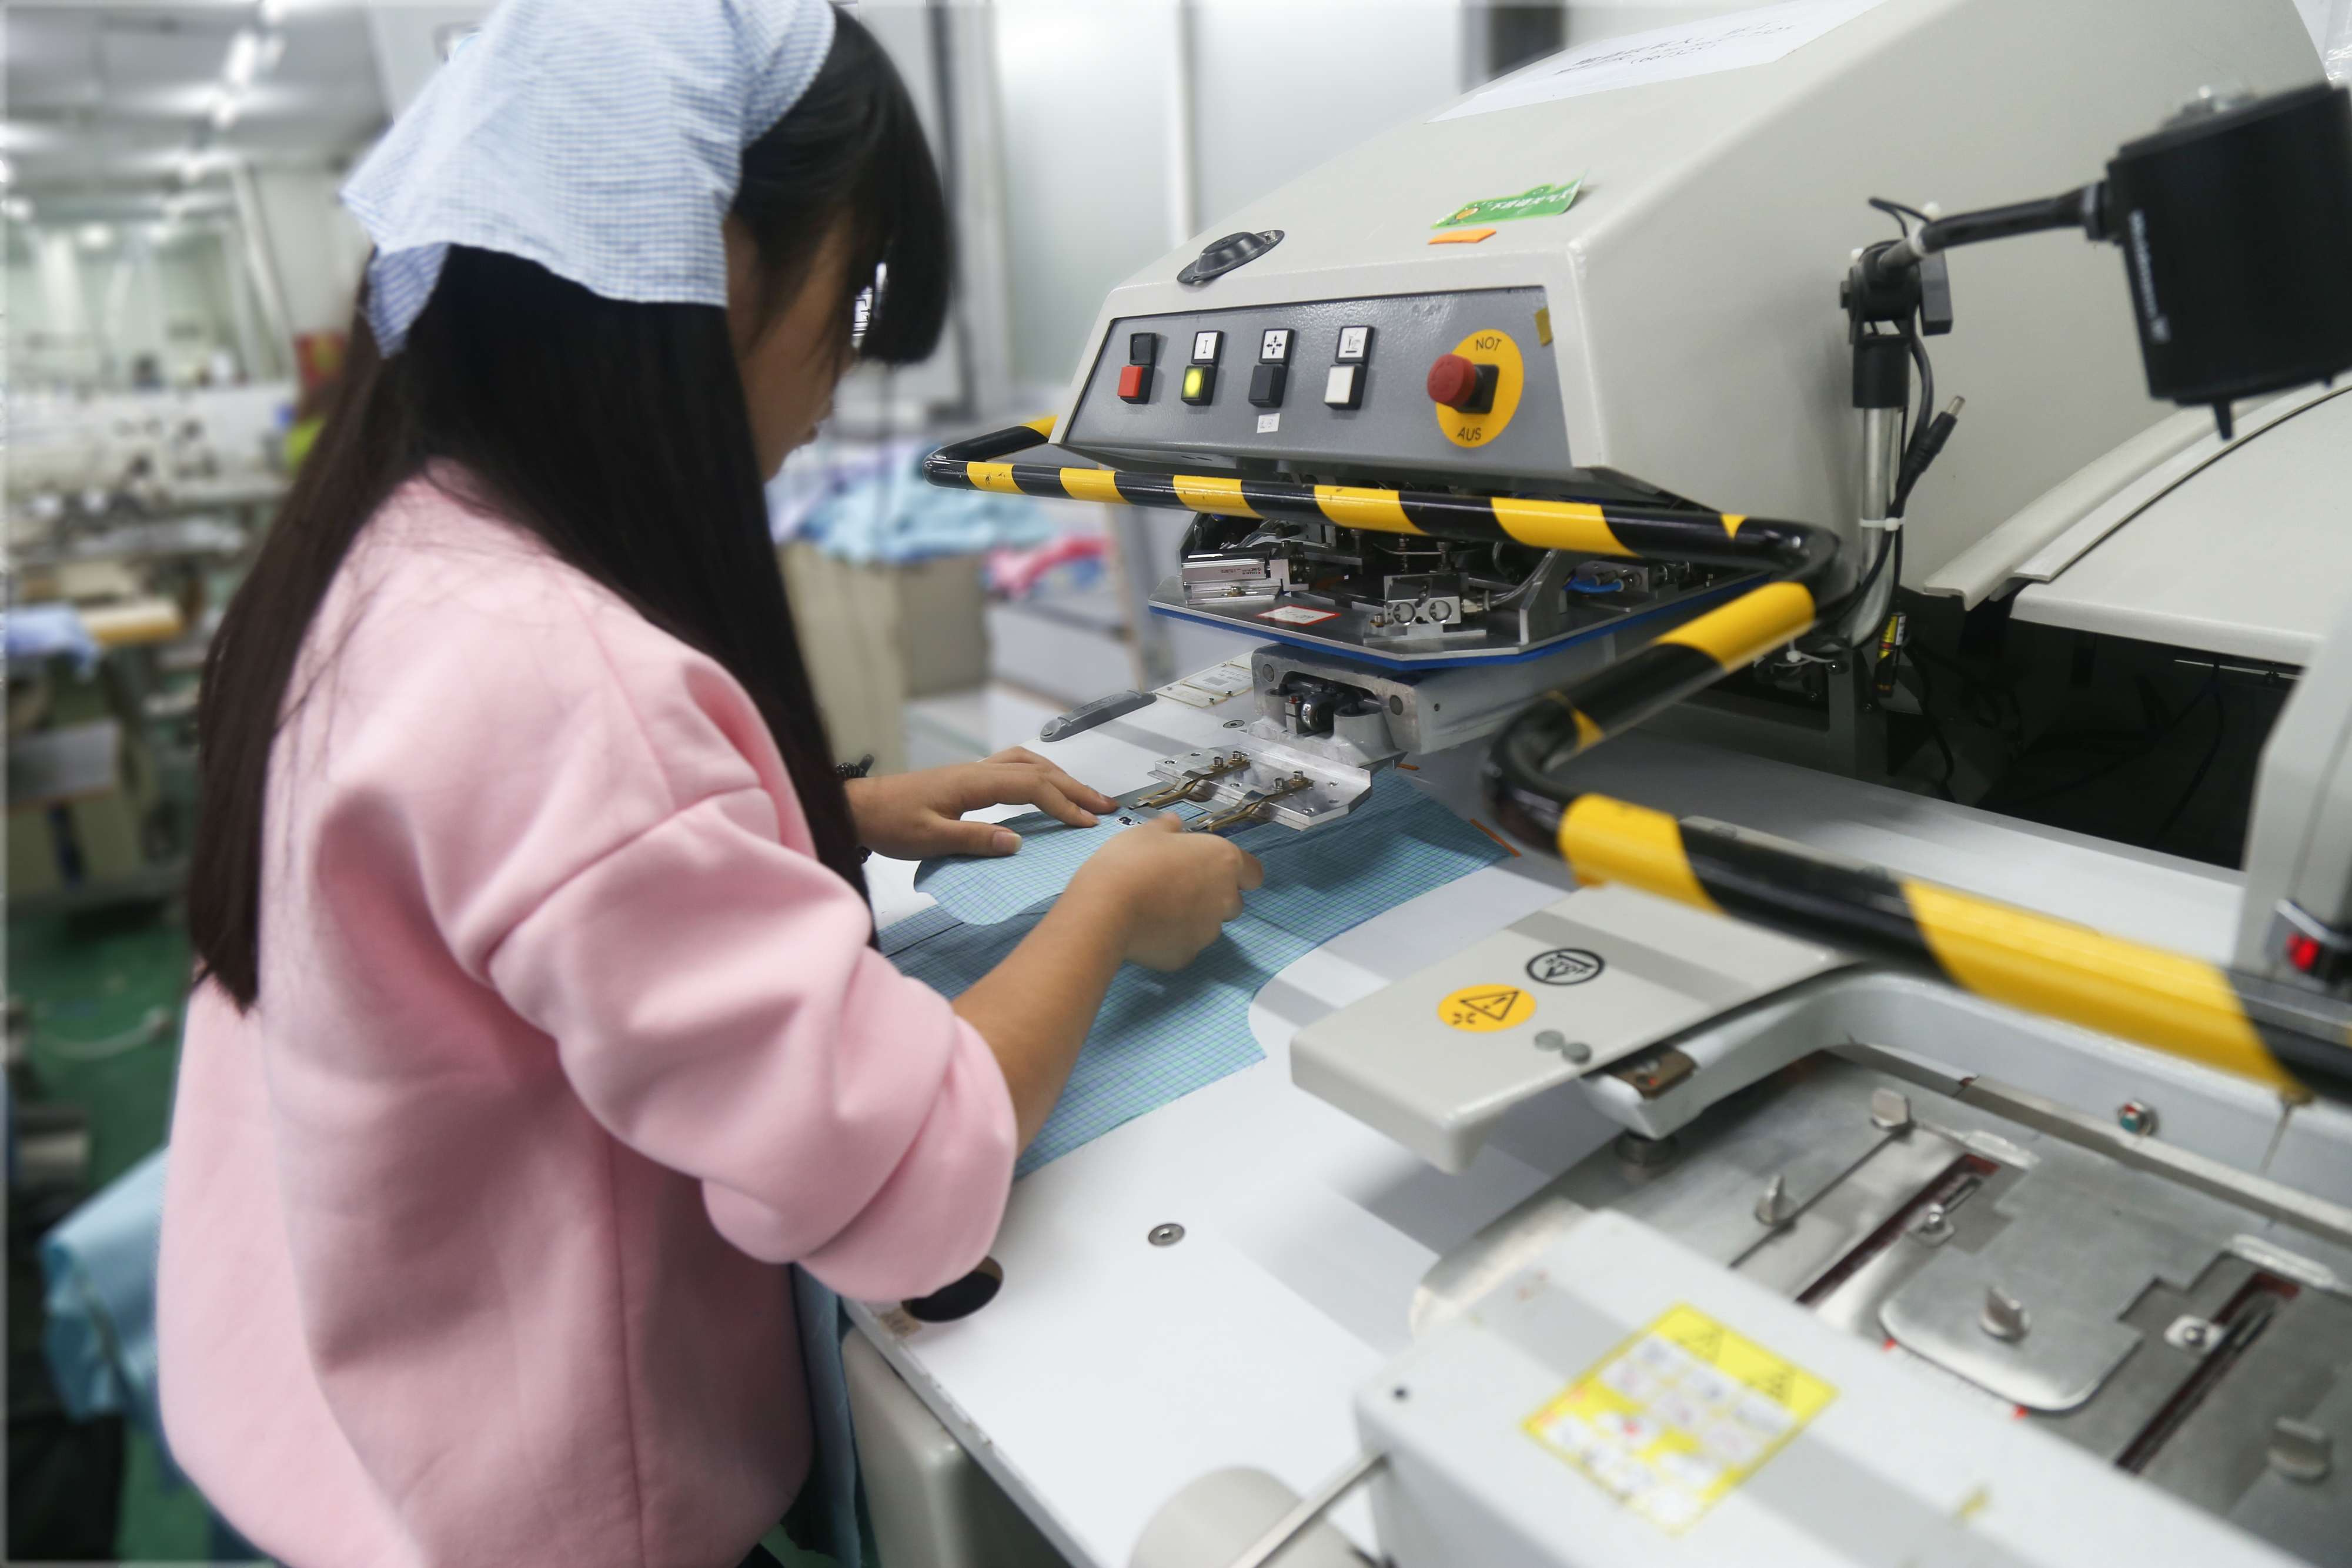 World’s largest shirt maker invests 2 billion yuan in new plant featuring robotics and water treatment facilities to help cut costs and protect natural beauty